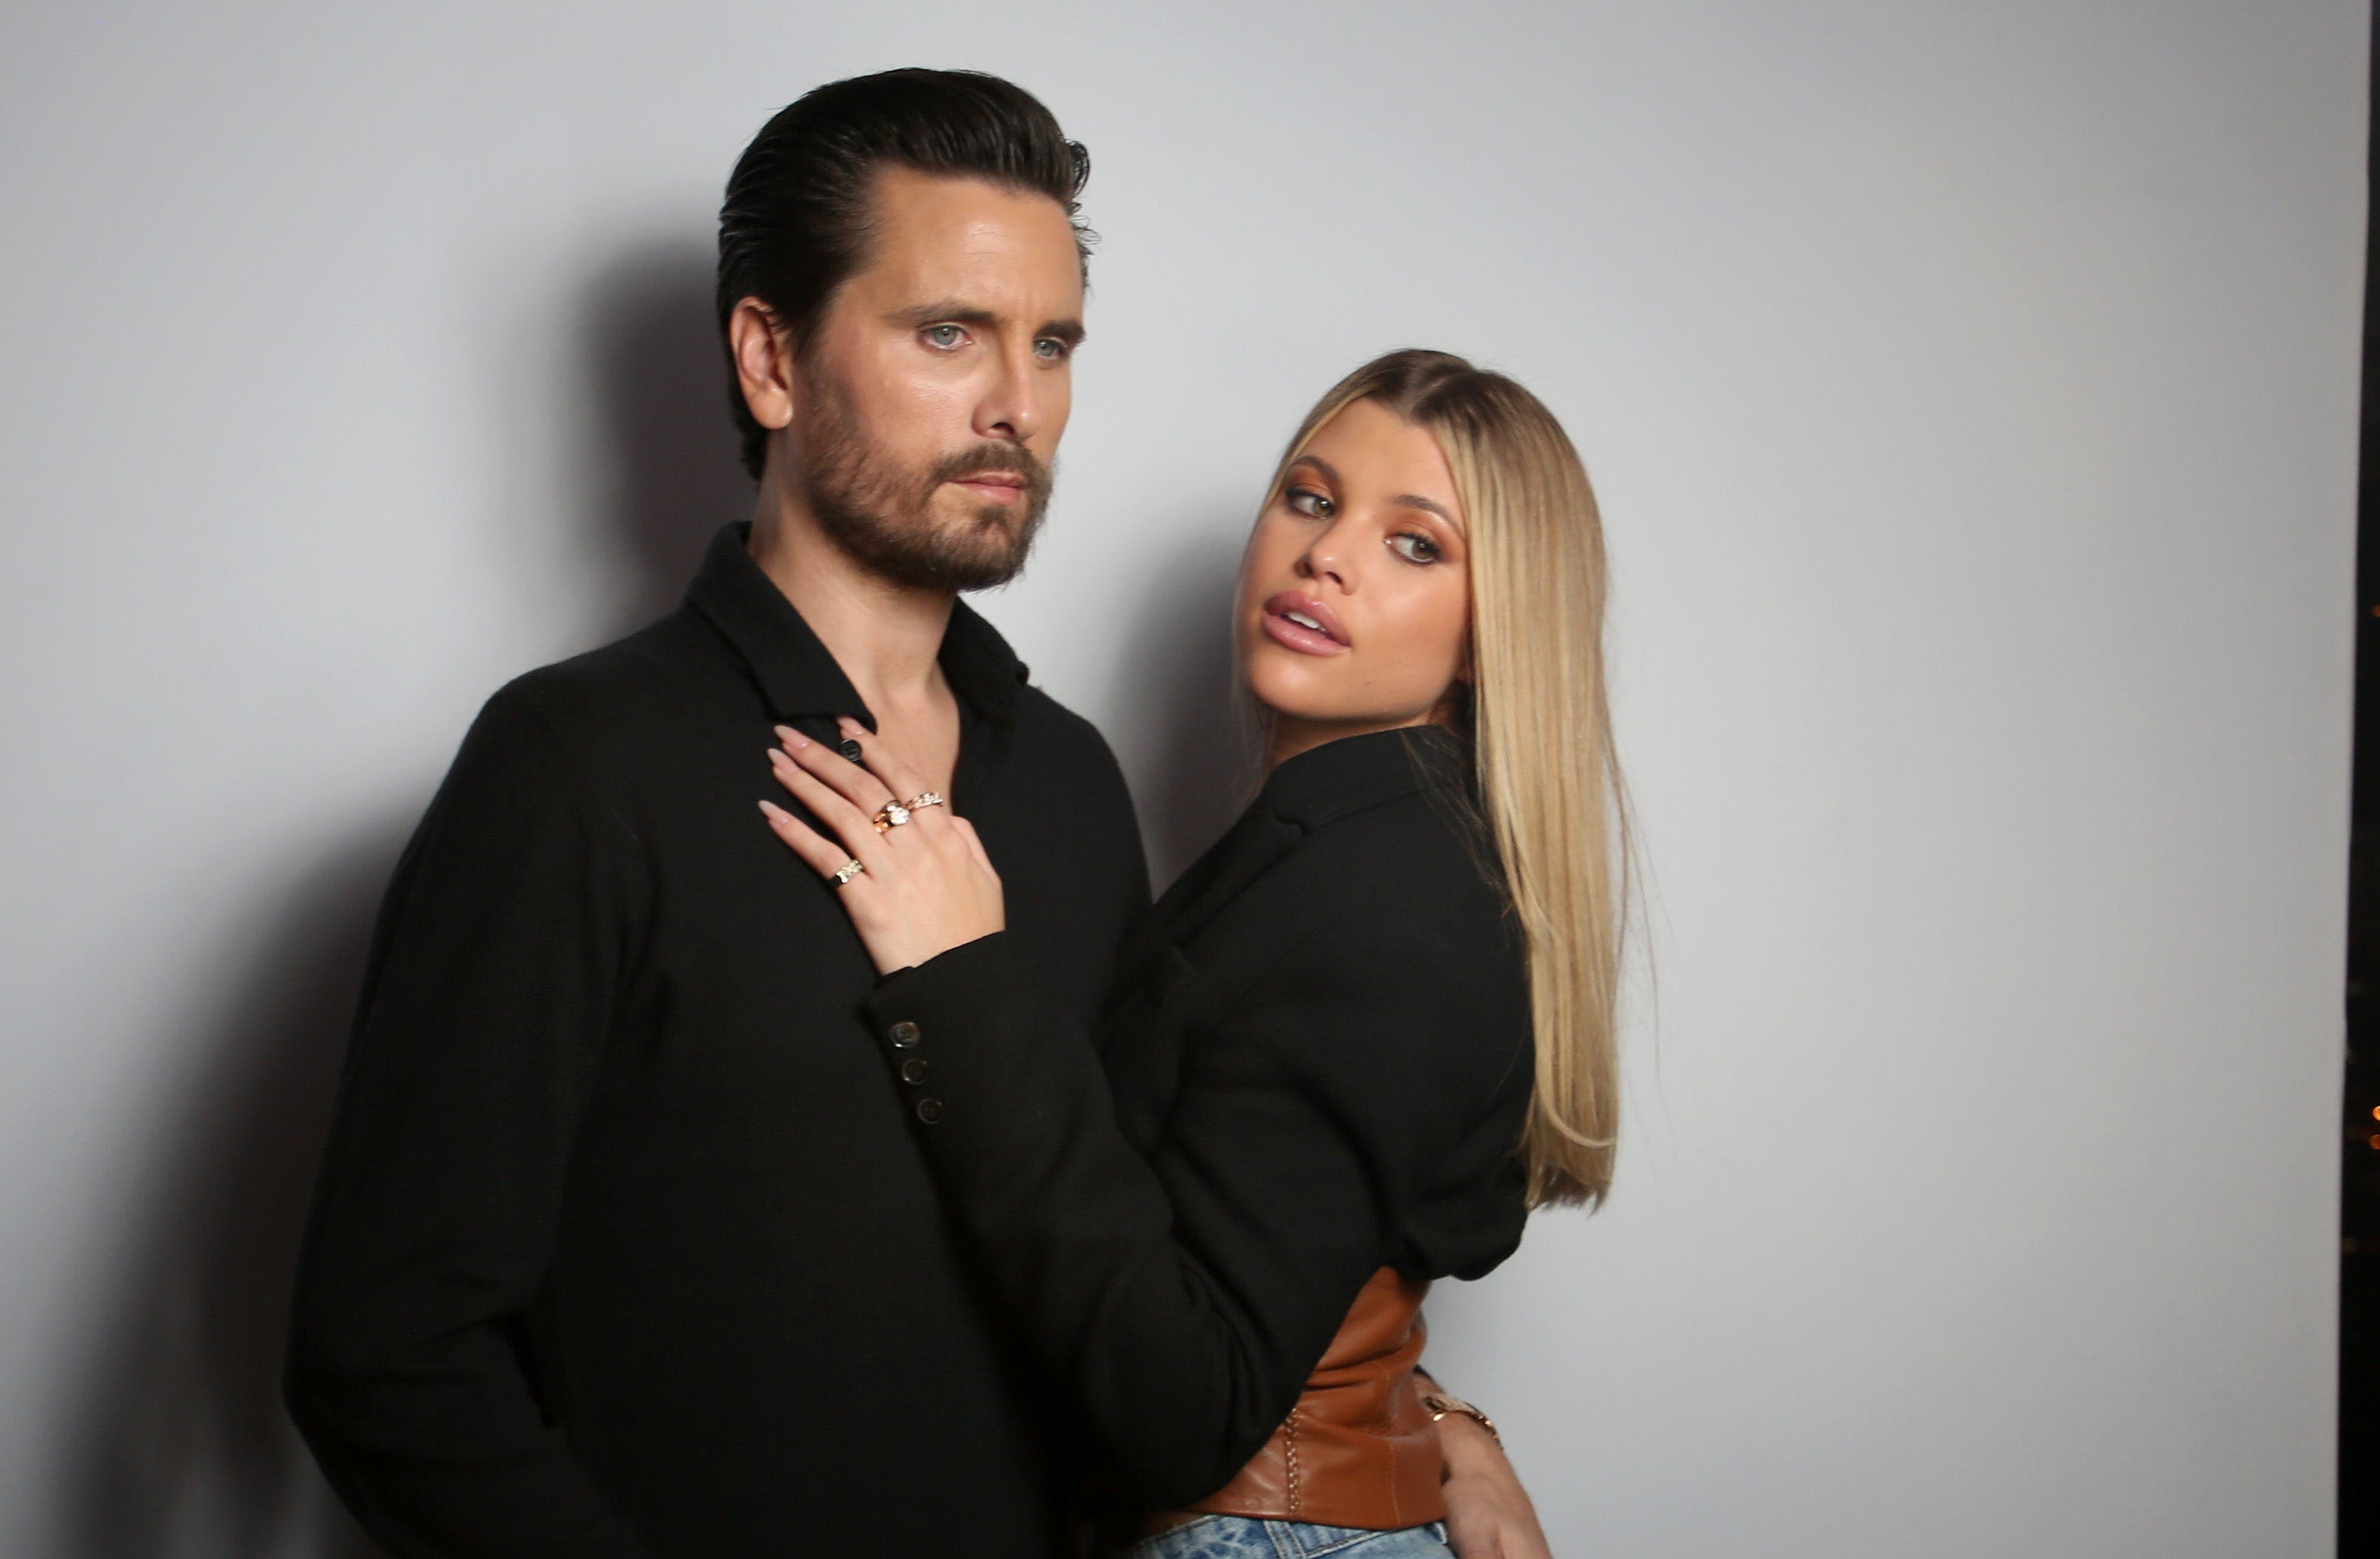 Scott Disick and Sofia Richie before the pandemic.